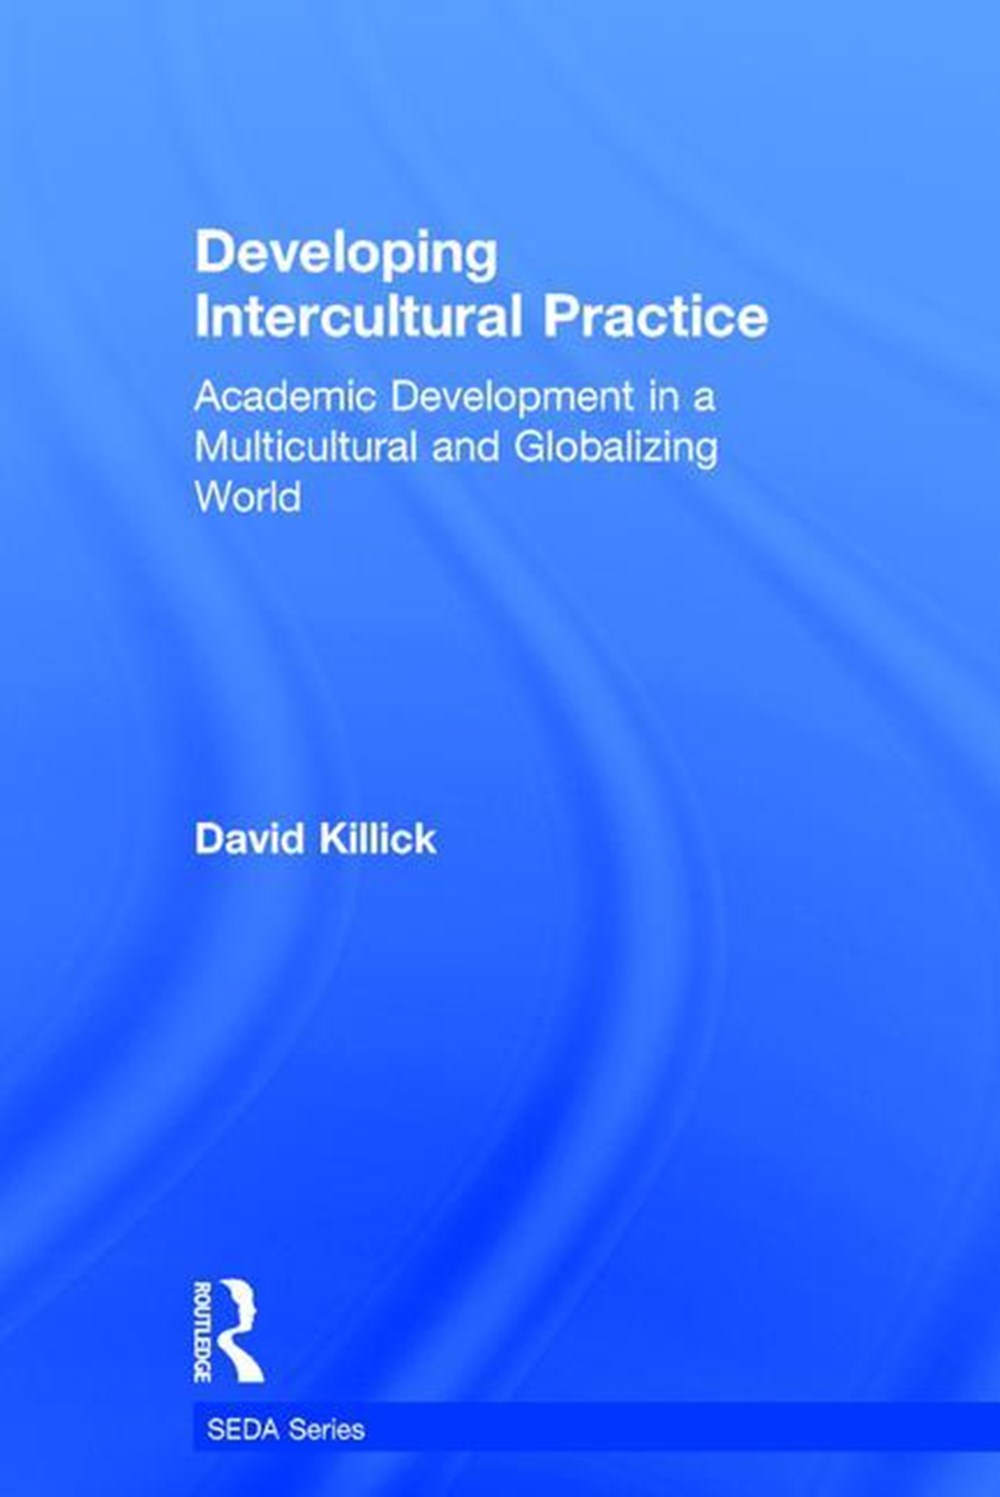 Developing Intercultural Practice: Academic Development in a Multicultural and Globalizing World